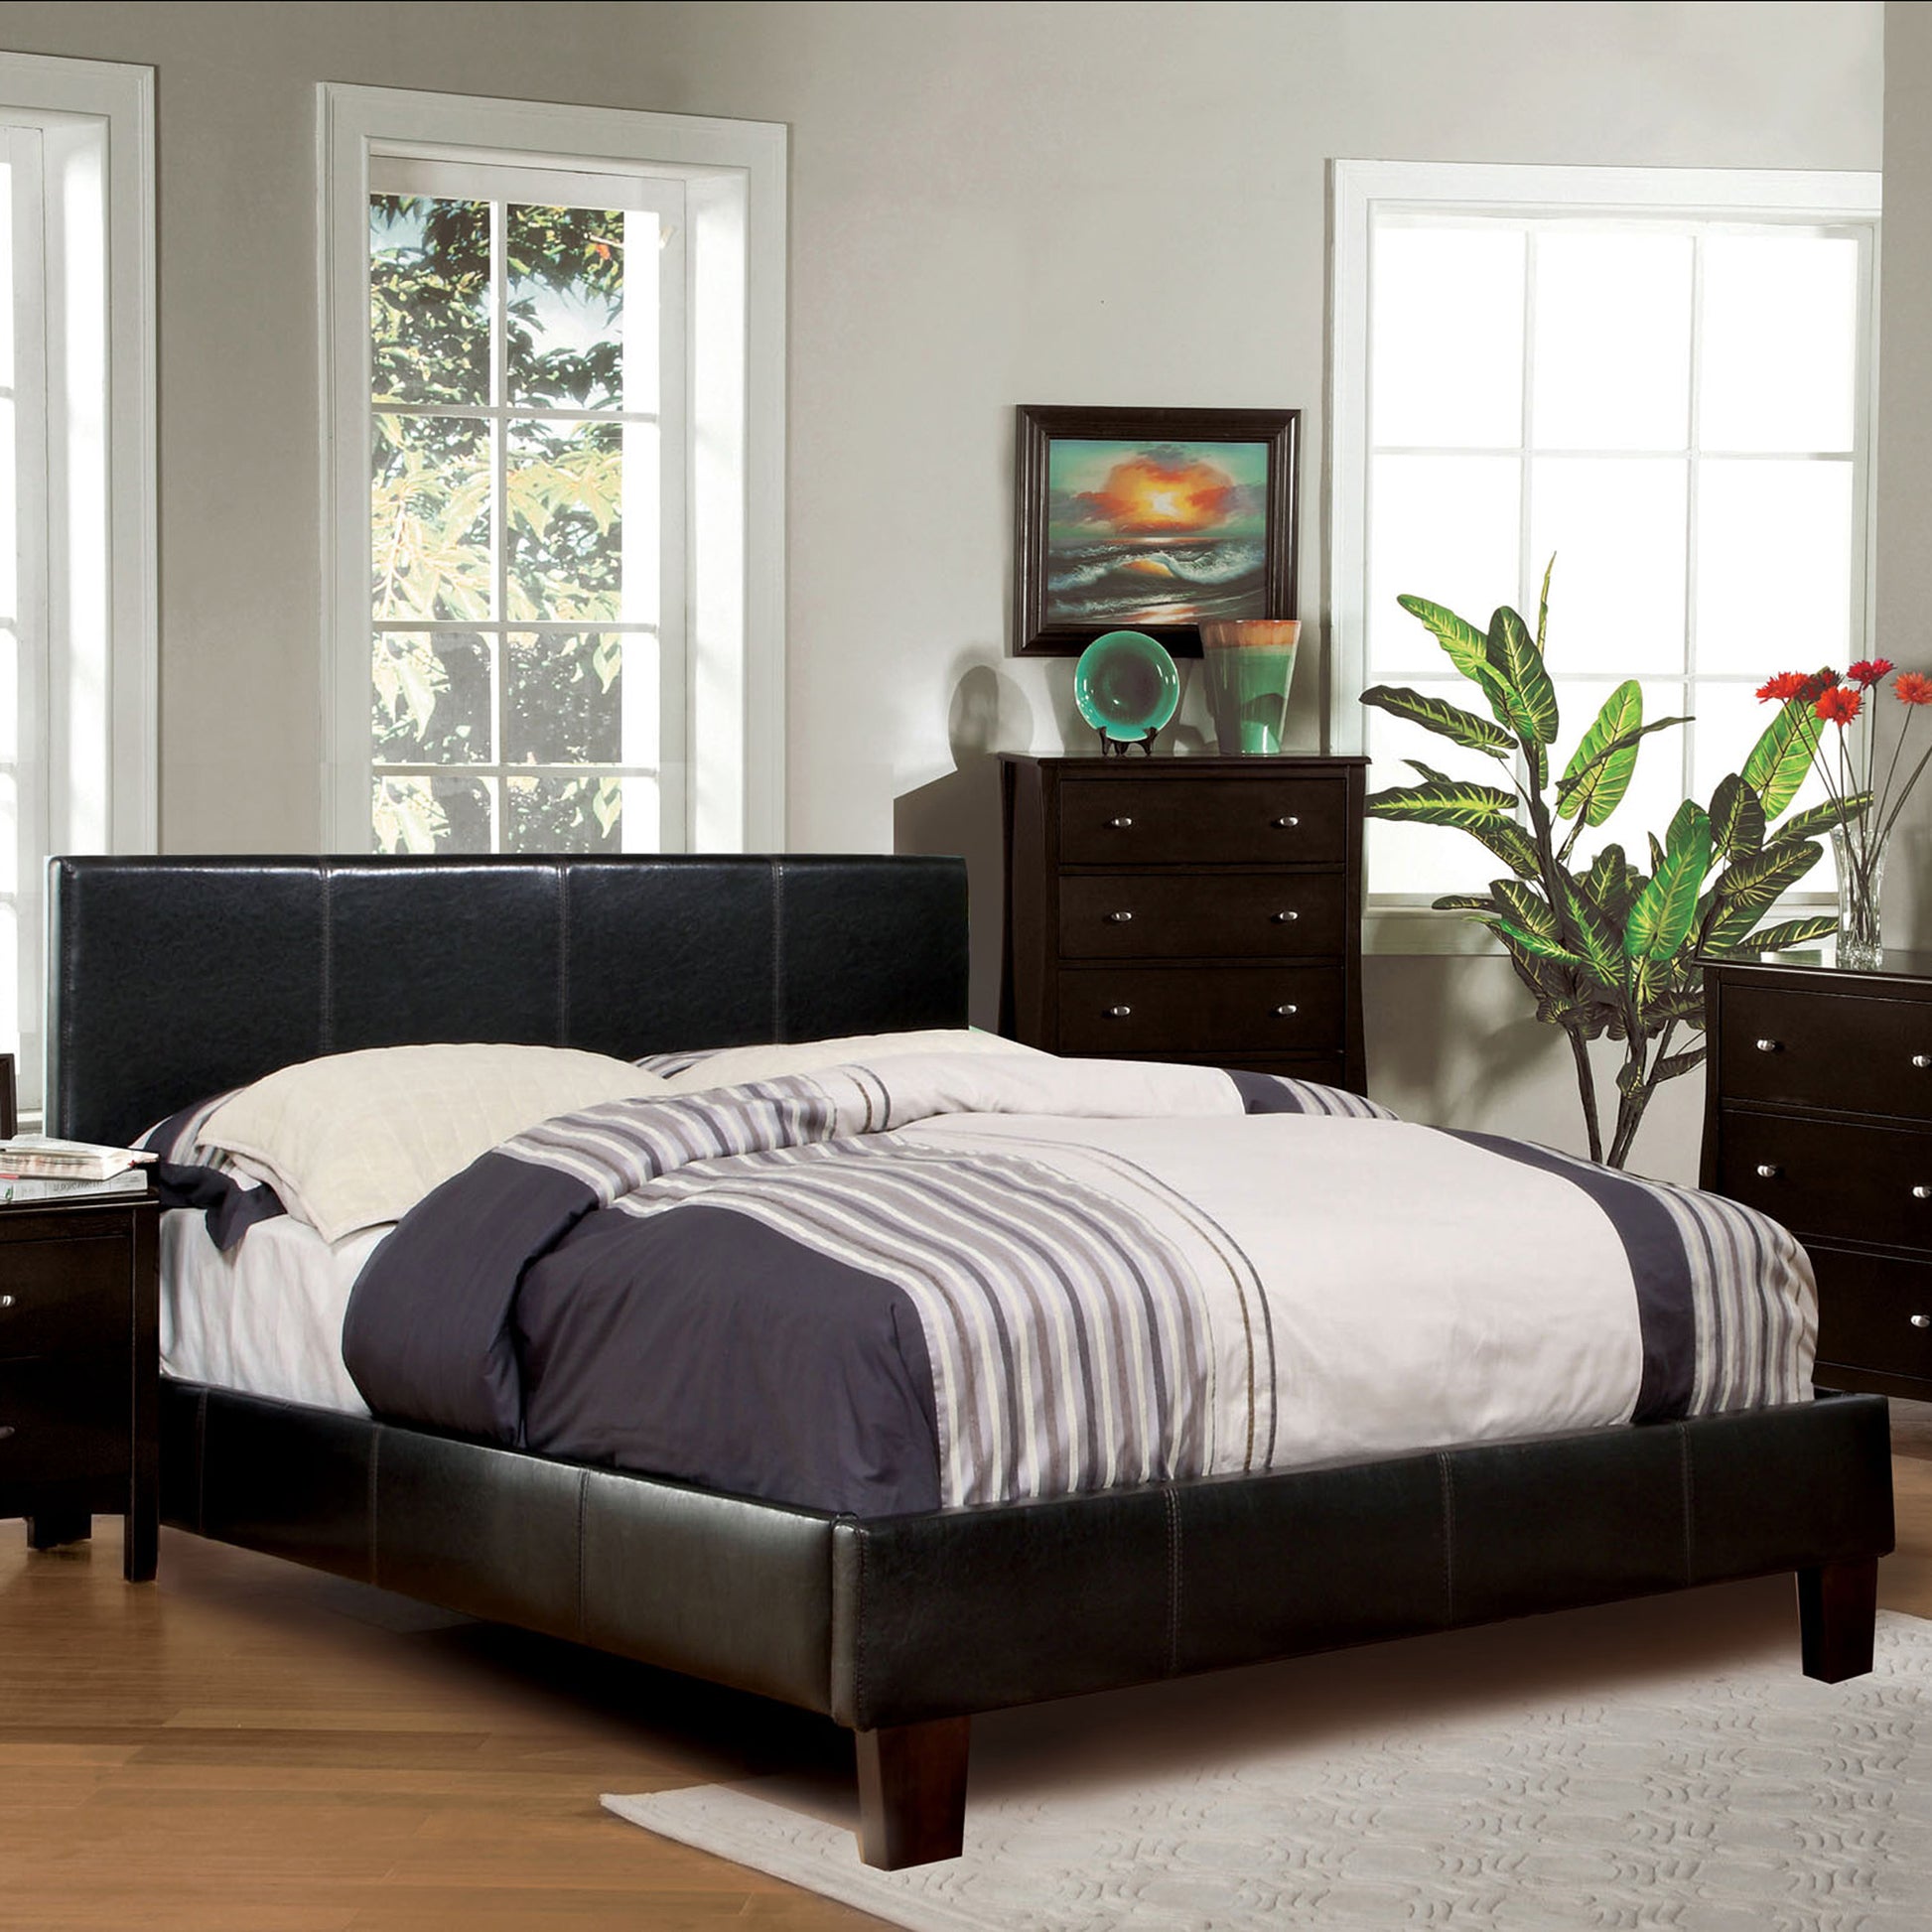 Right angled contemporary espresso faux leather platform bed in a bedroom with accessories